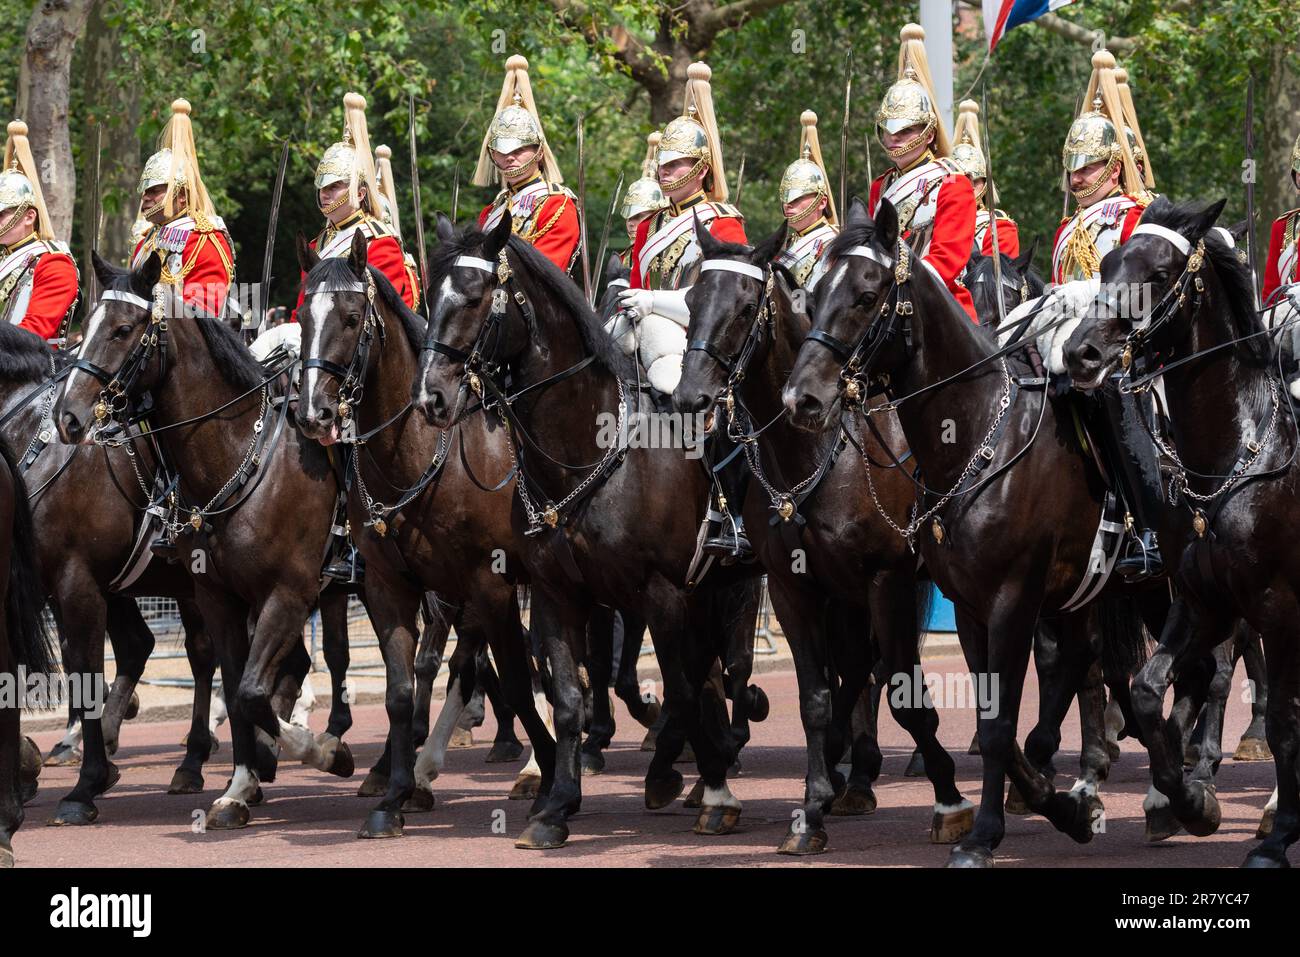 The Life Guards of the Household Cavalry Mounted Regiment at Trooping the Colour in The Mall, London, UK. Sovereign's escort of British Army riders Stock Photo